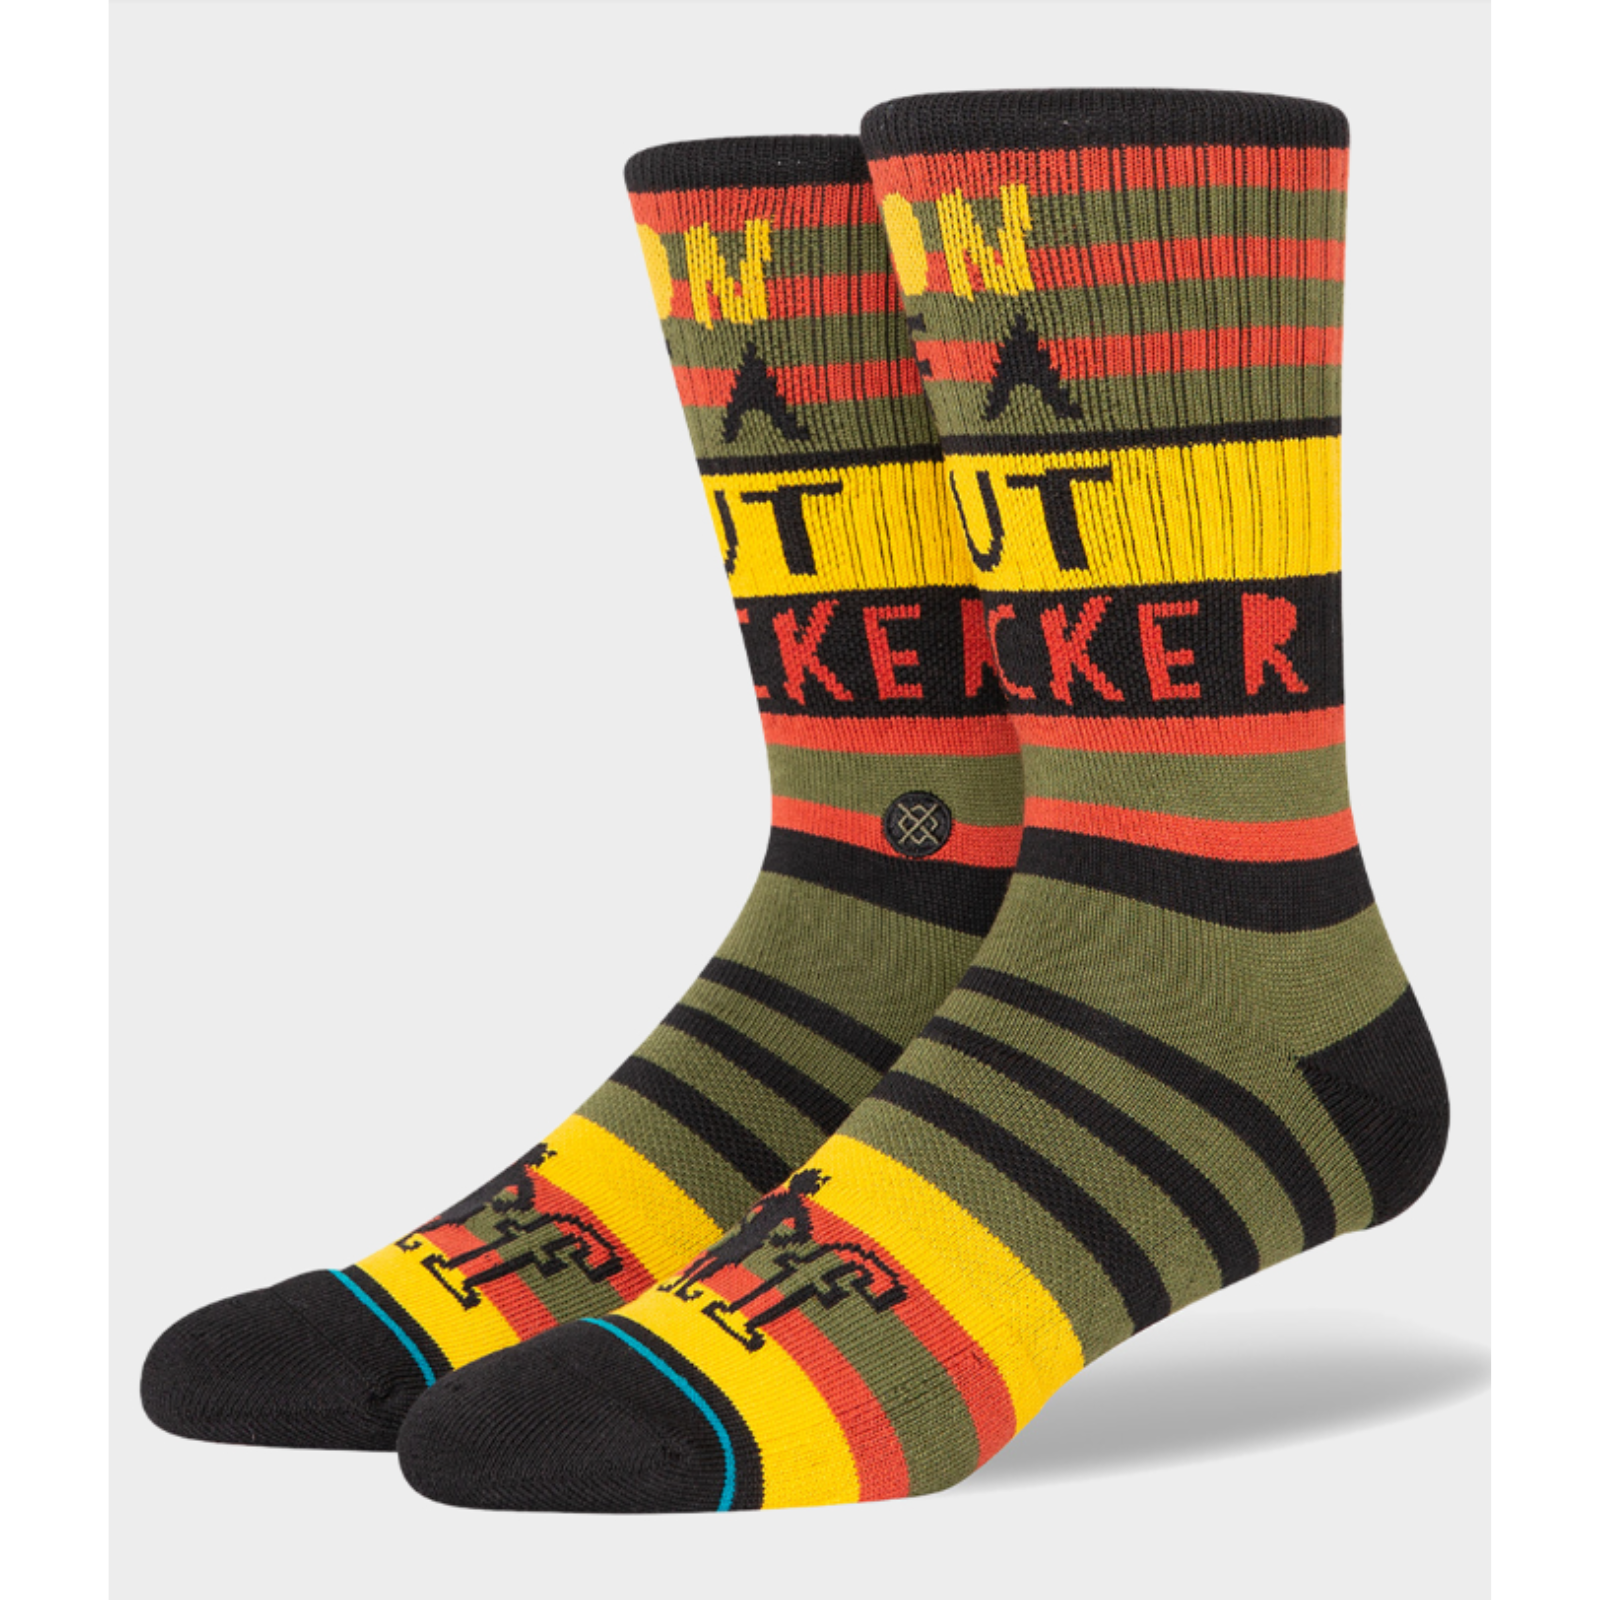 Stance Son of a Nutcracker men's crew sock featuring "Son of A Nutcracker" from the movie Elf on green, red, yellow, and black striped socks. Socks shown on display feet. 